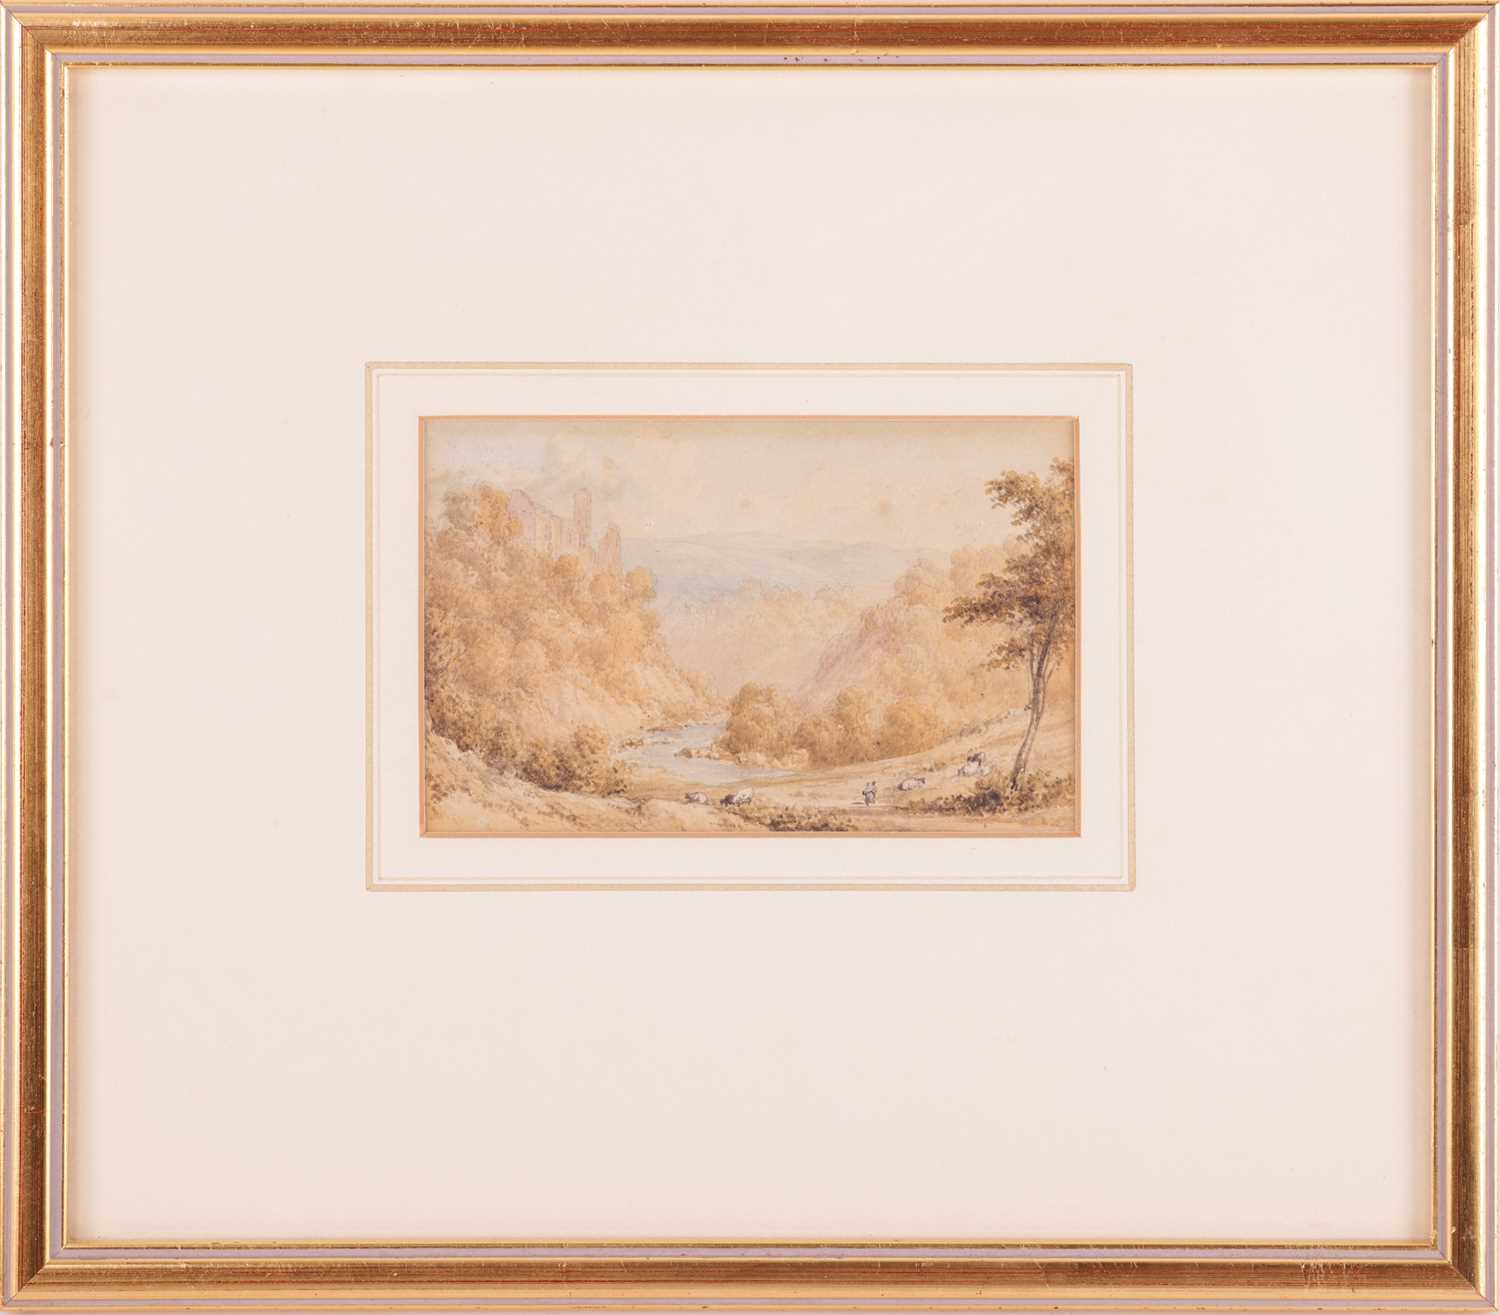 William Westall (1781 - 1850), 'Berry Pomeroy Castle' and 'Shaugh Bridge on the River Plym, Devonshi - Image 2 of 7